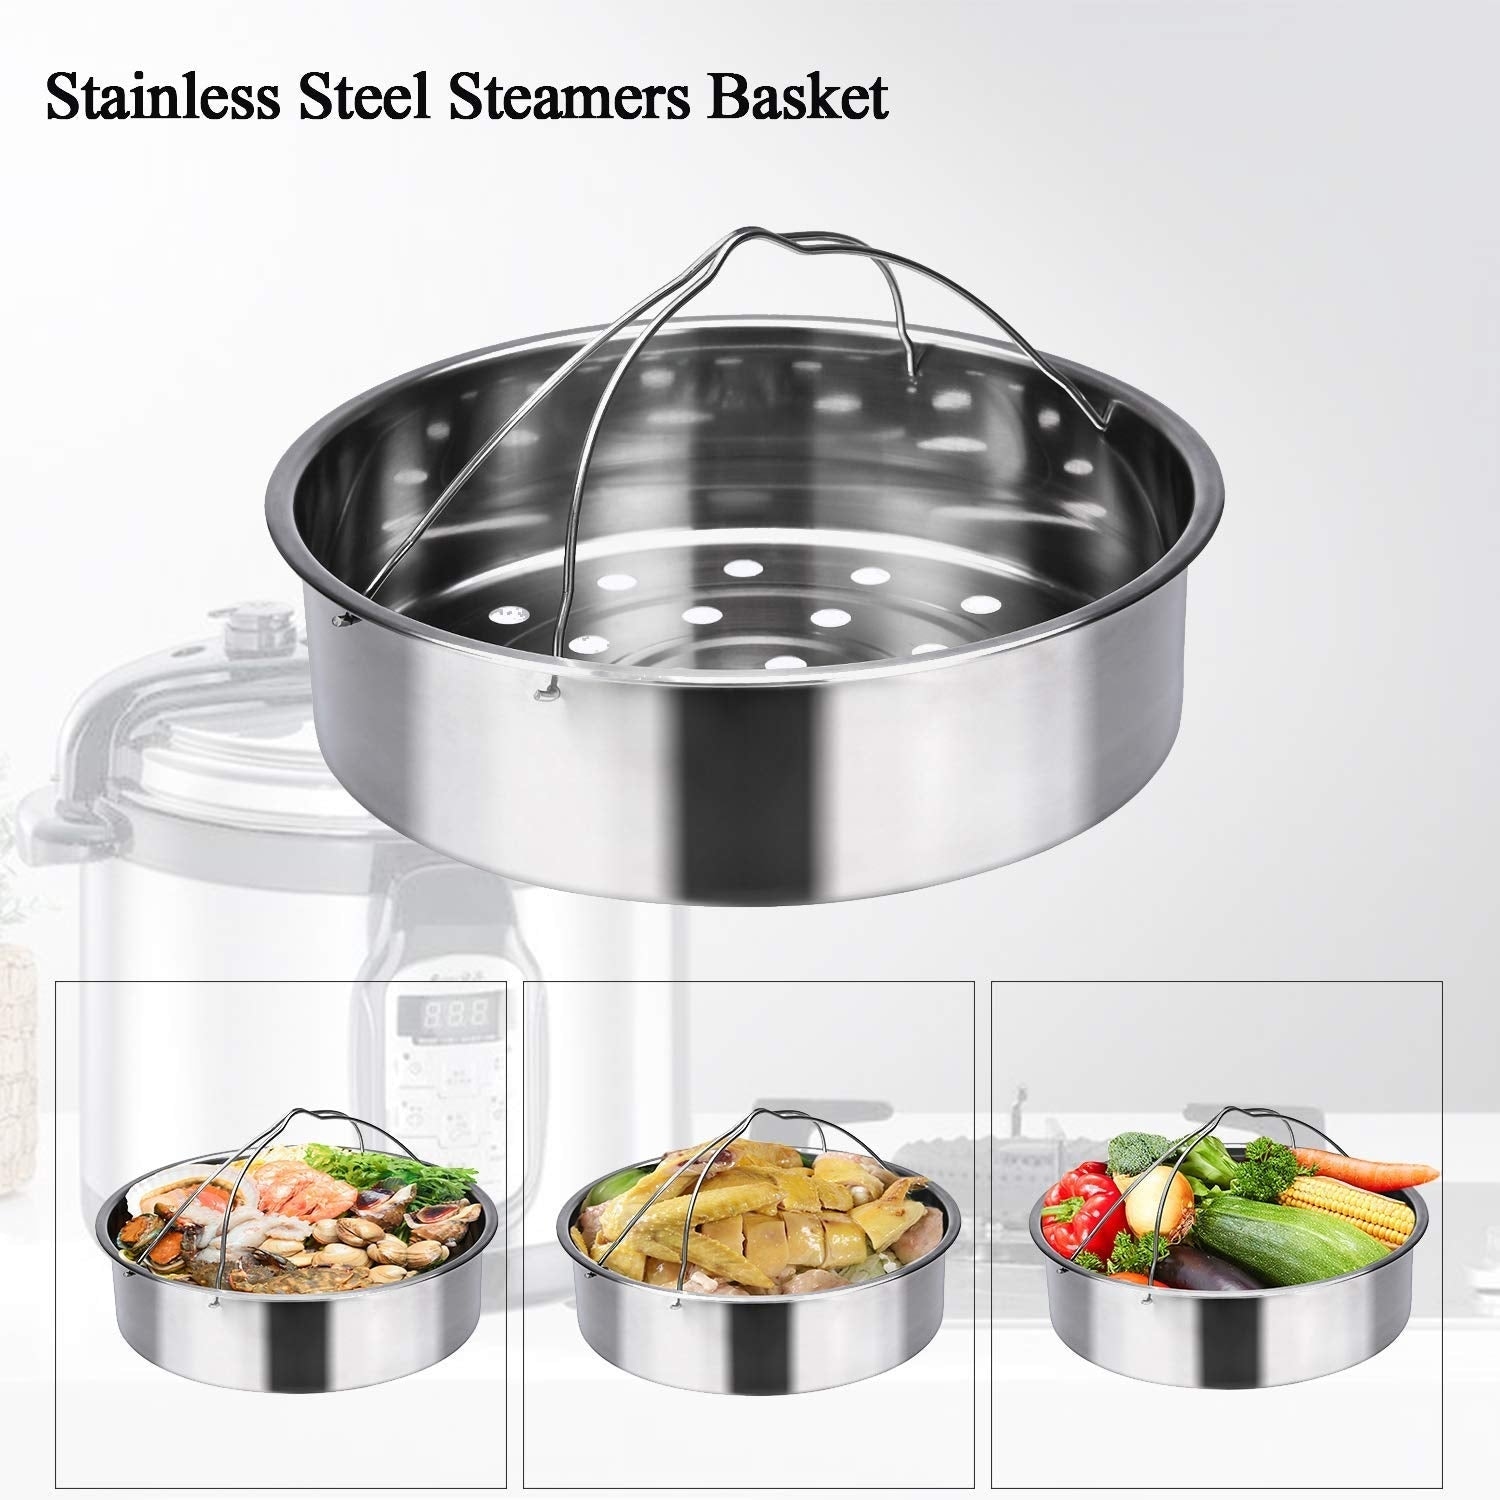 https://ak1.ostkcdn.com/images/products/is/images/direct/ac51355e20ff6b6236936bfc7fe3a87647199a81/FITNATE-Instant-Pot-Pressure-Cooker-Steamer-Basket-8-Pack.jpg